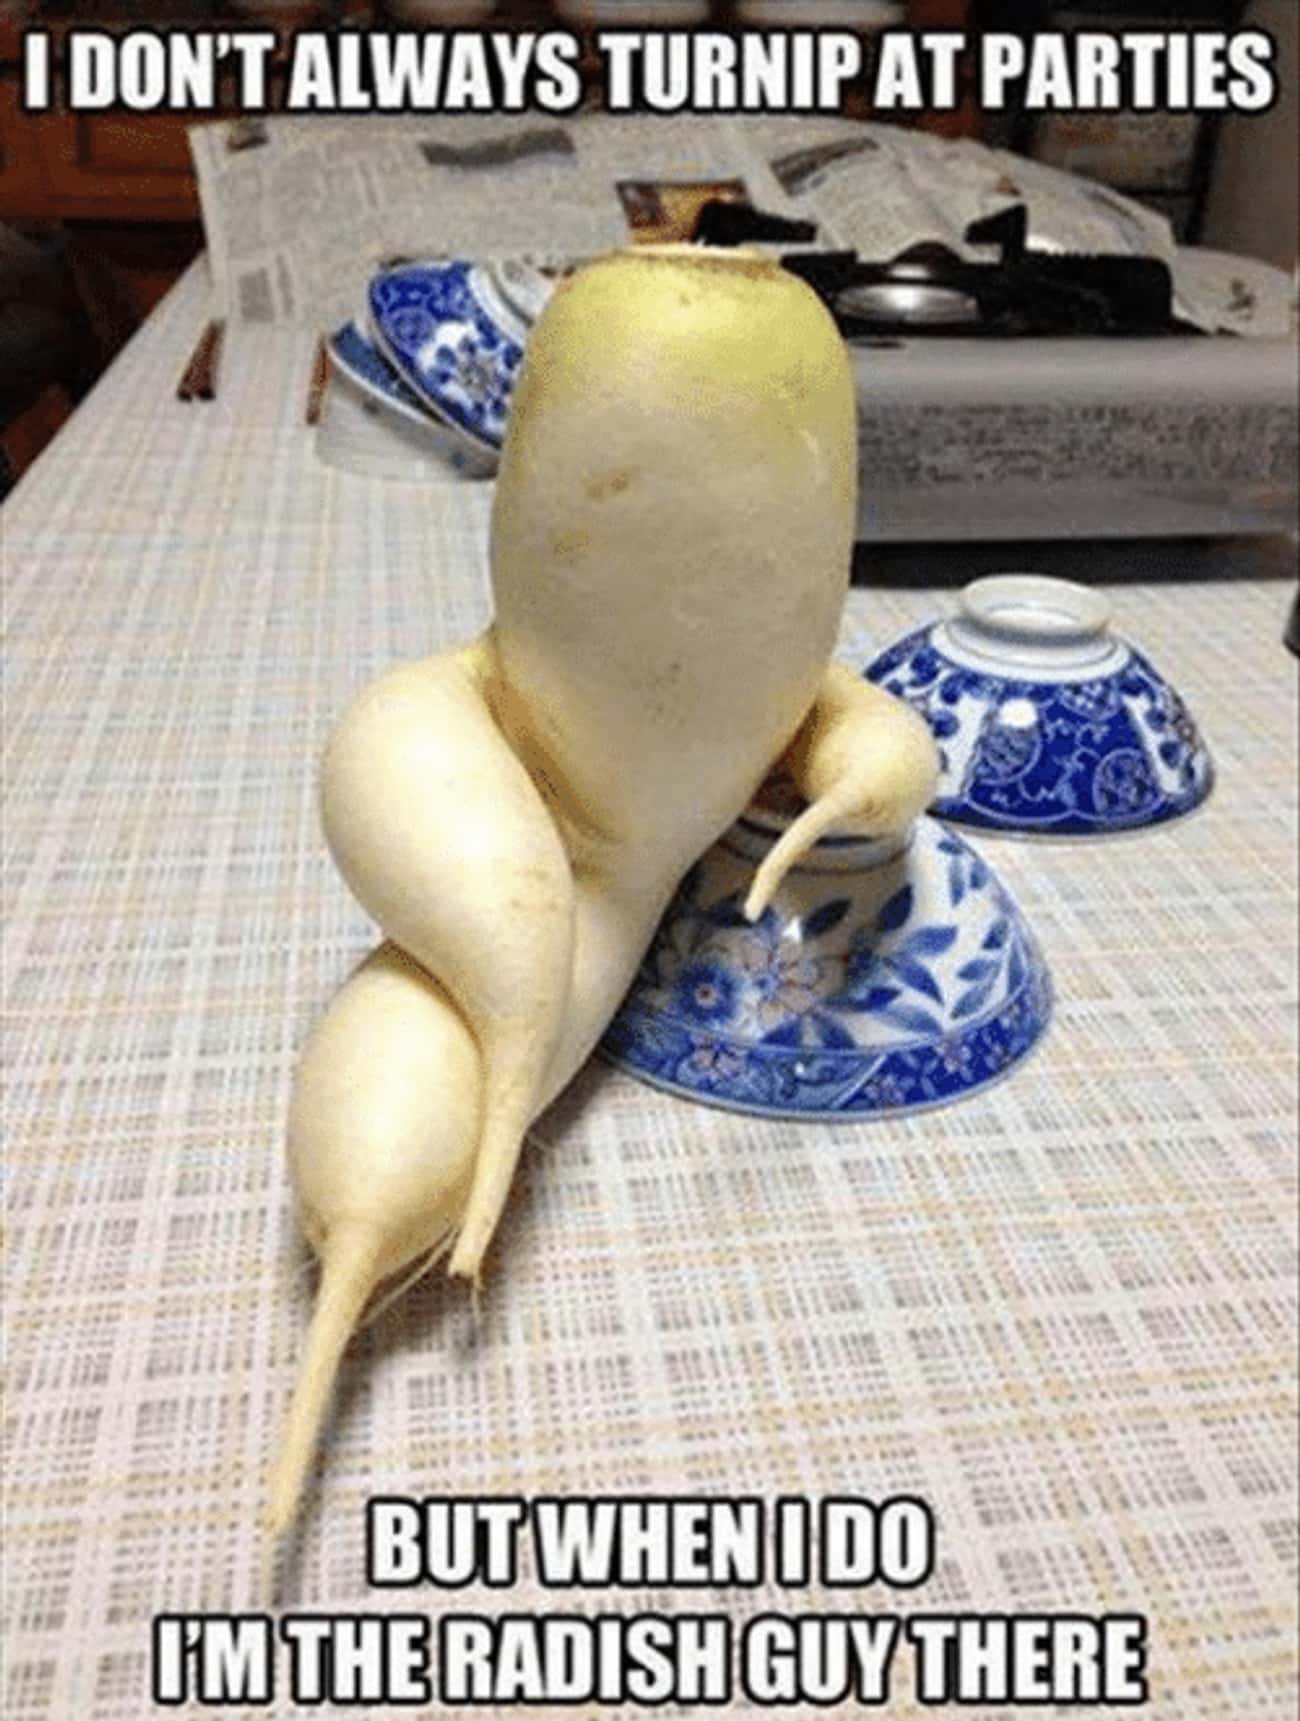 The Most Interesting Turnip In The World